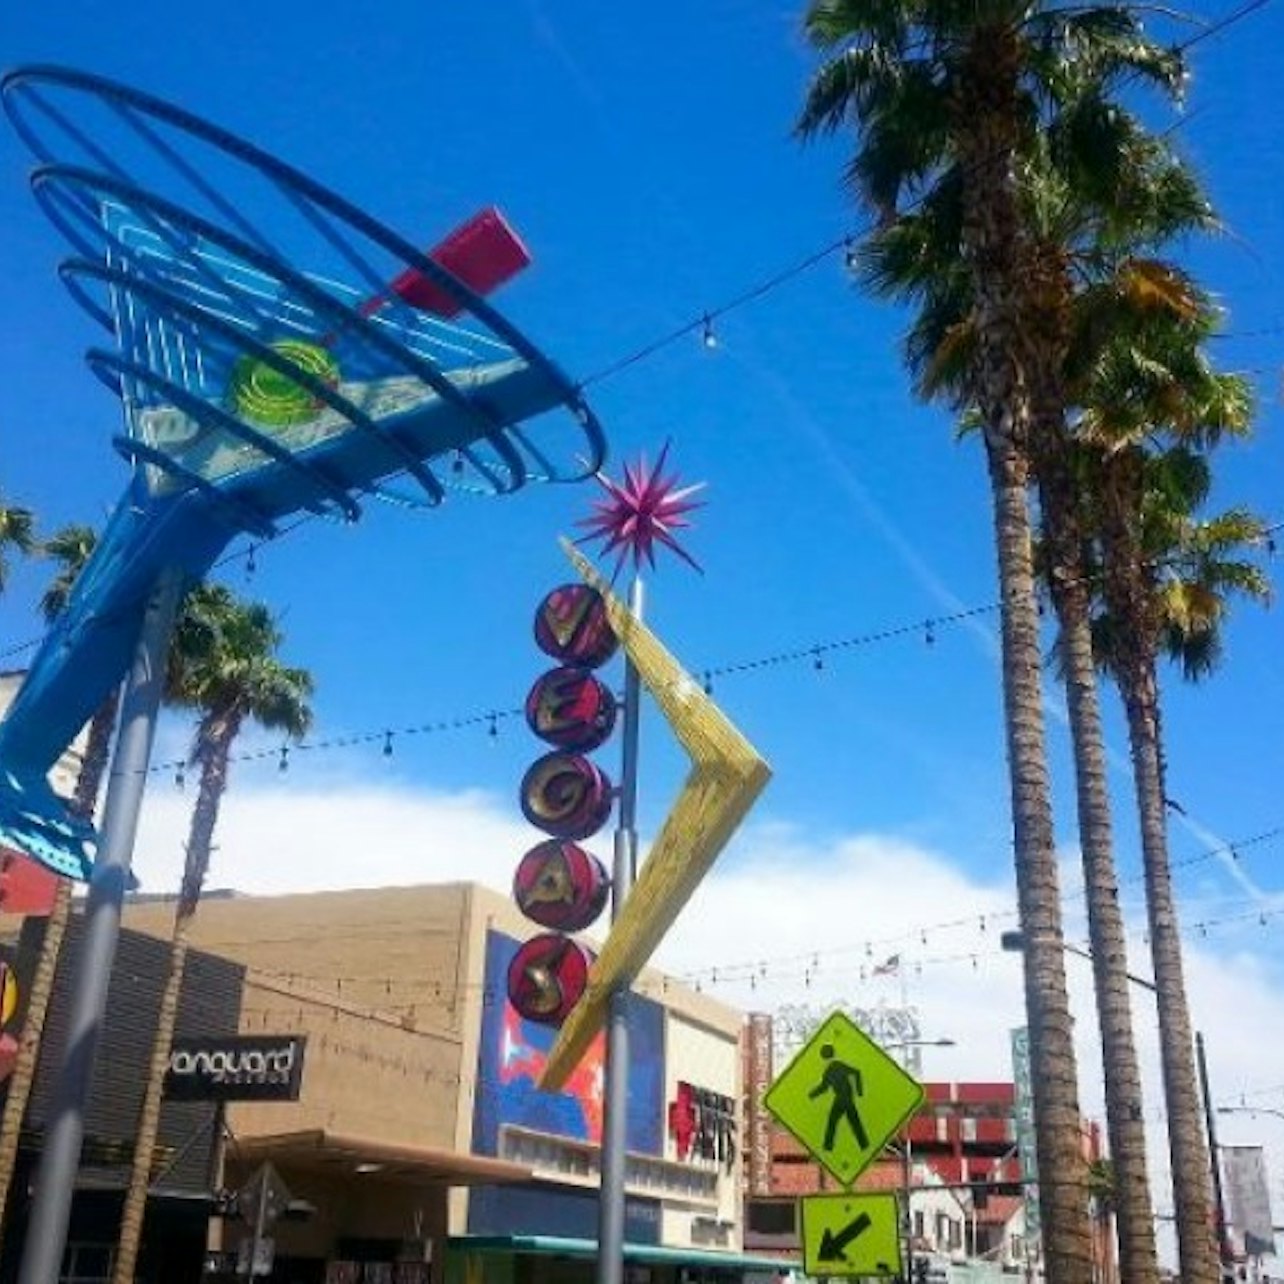 Downtown Las Vegas: Walking Tour of Fremont Street from Past to Present - Accommodations in Las Vegas